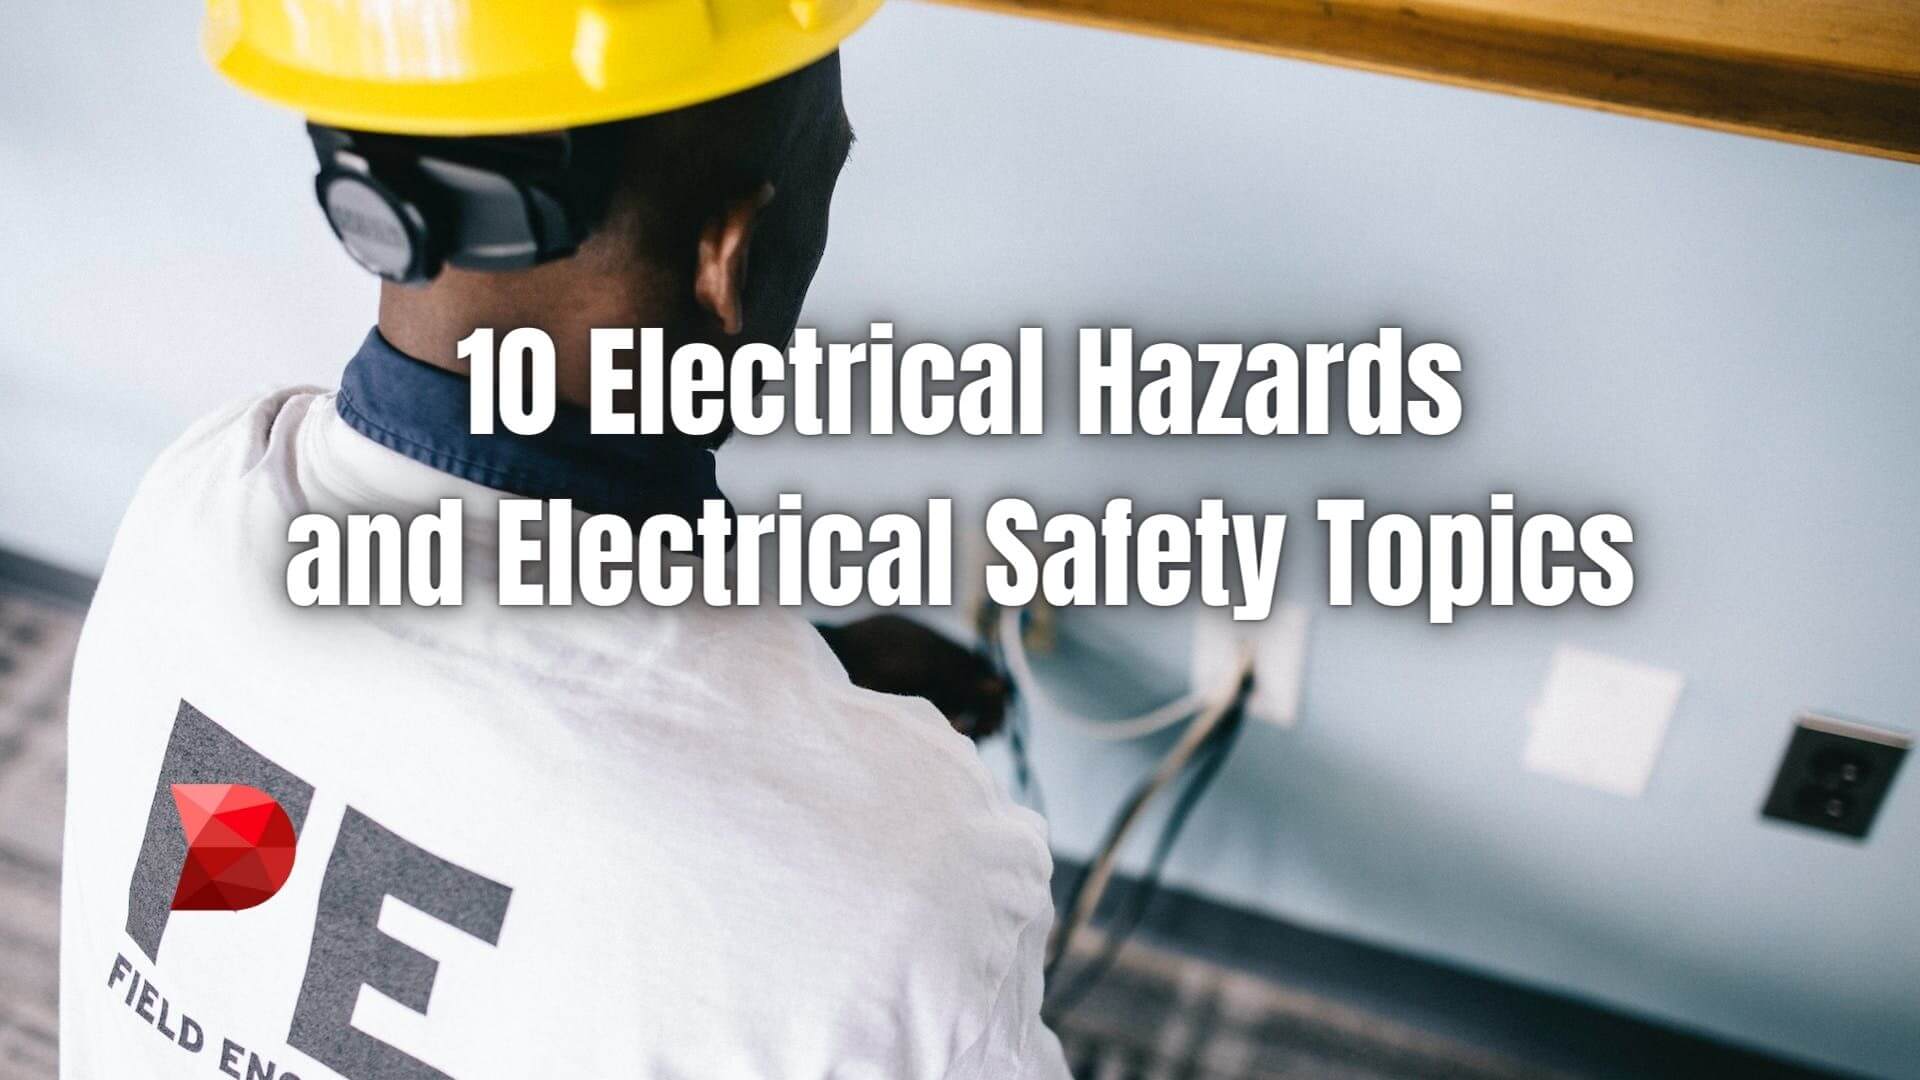 Discover 10 crucial electrical safety topics in this guide. Click here to learn how to identify and mitigate potential hazards effectively.